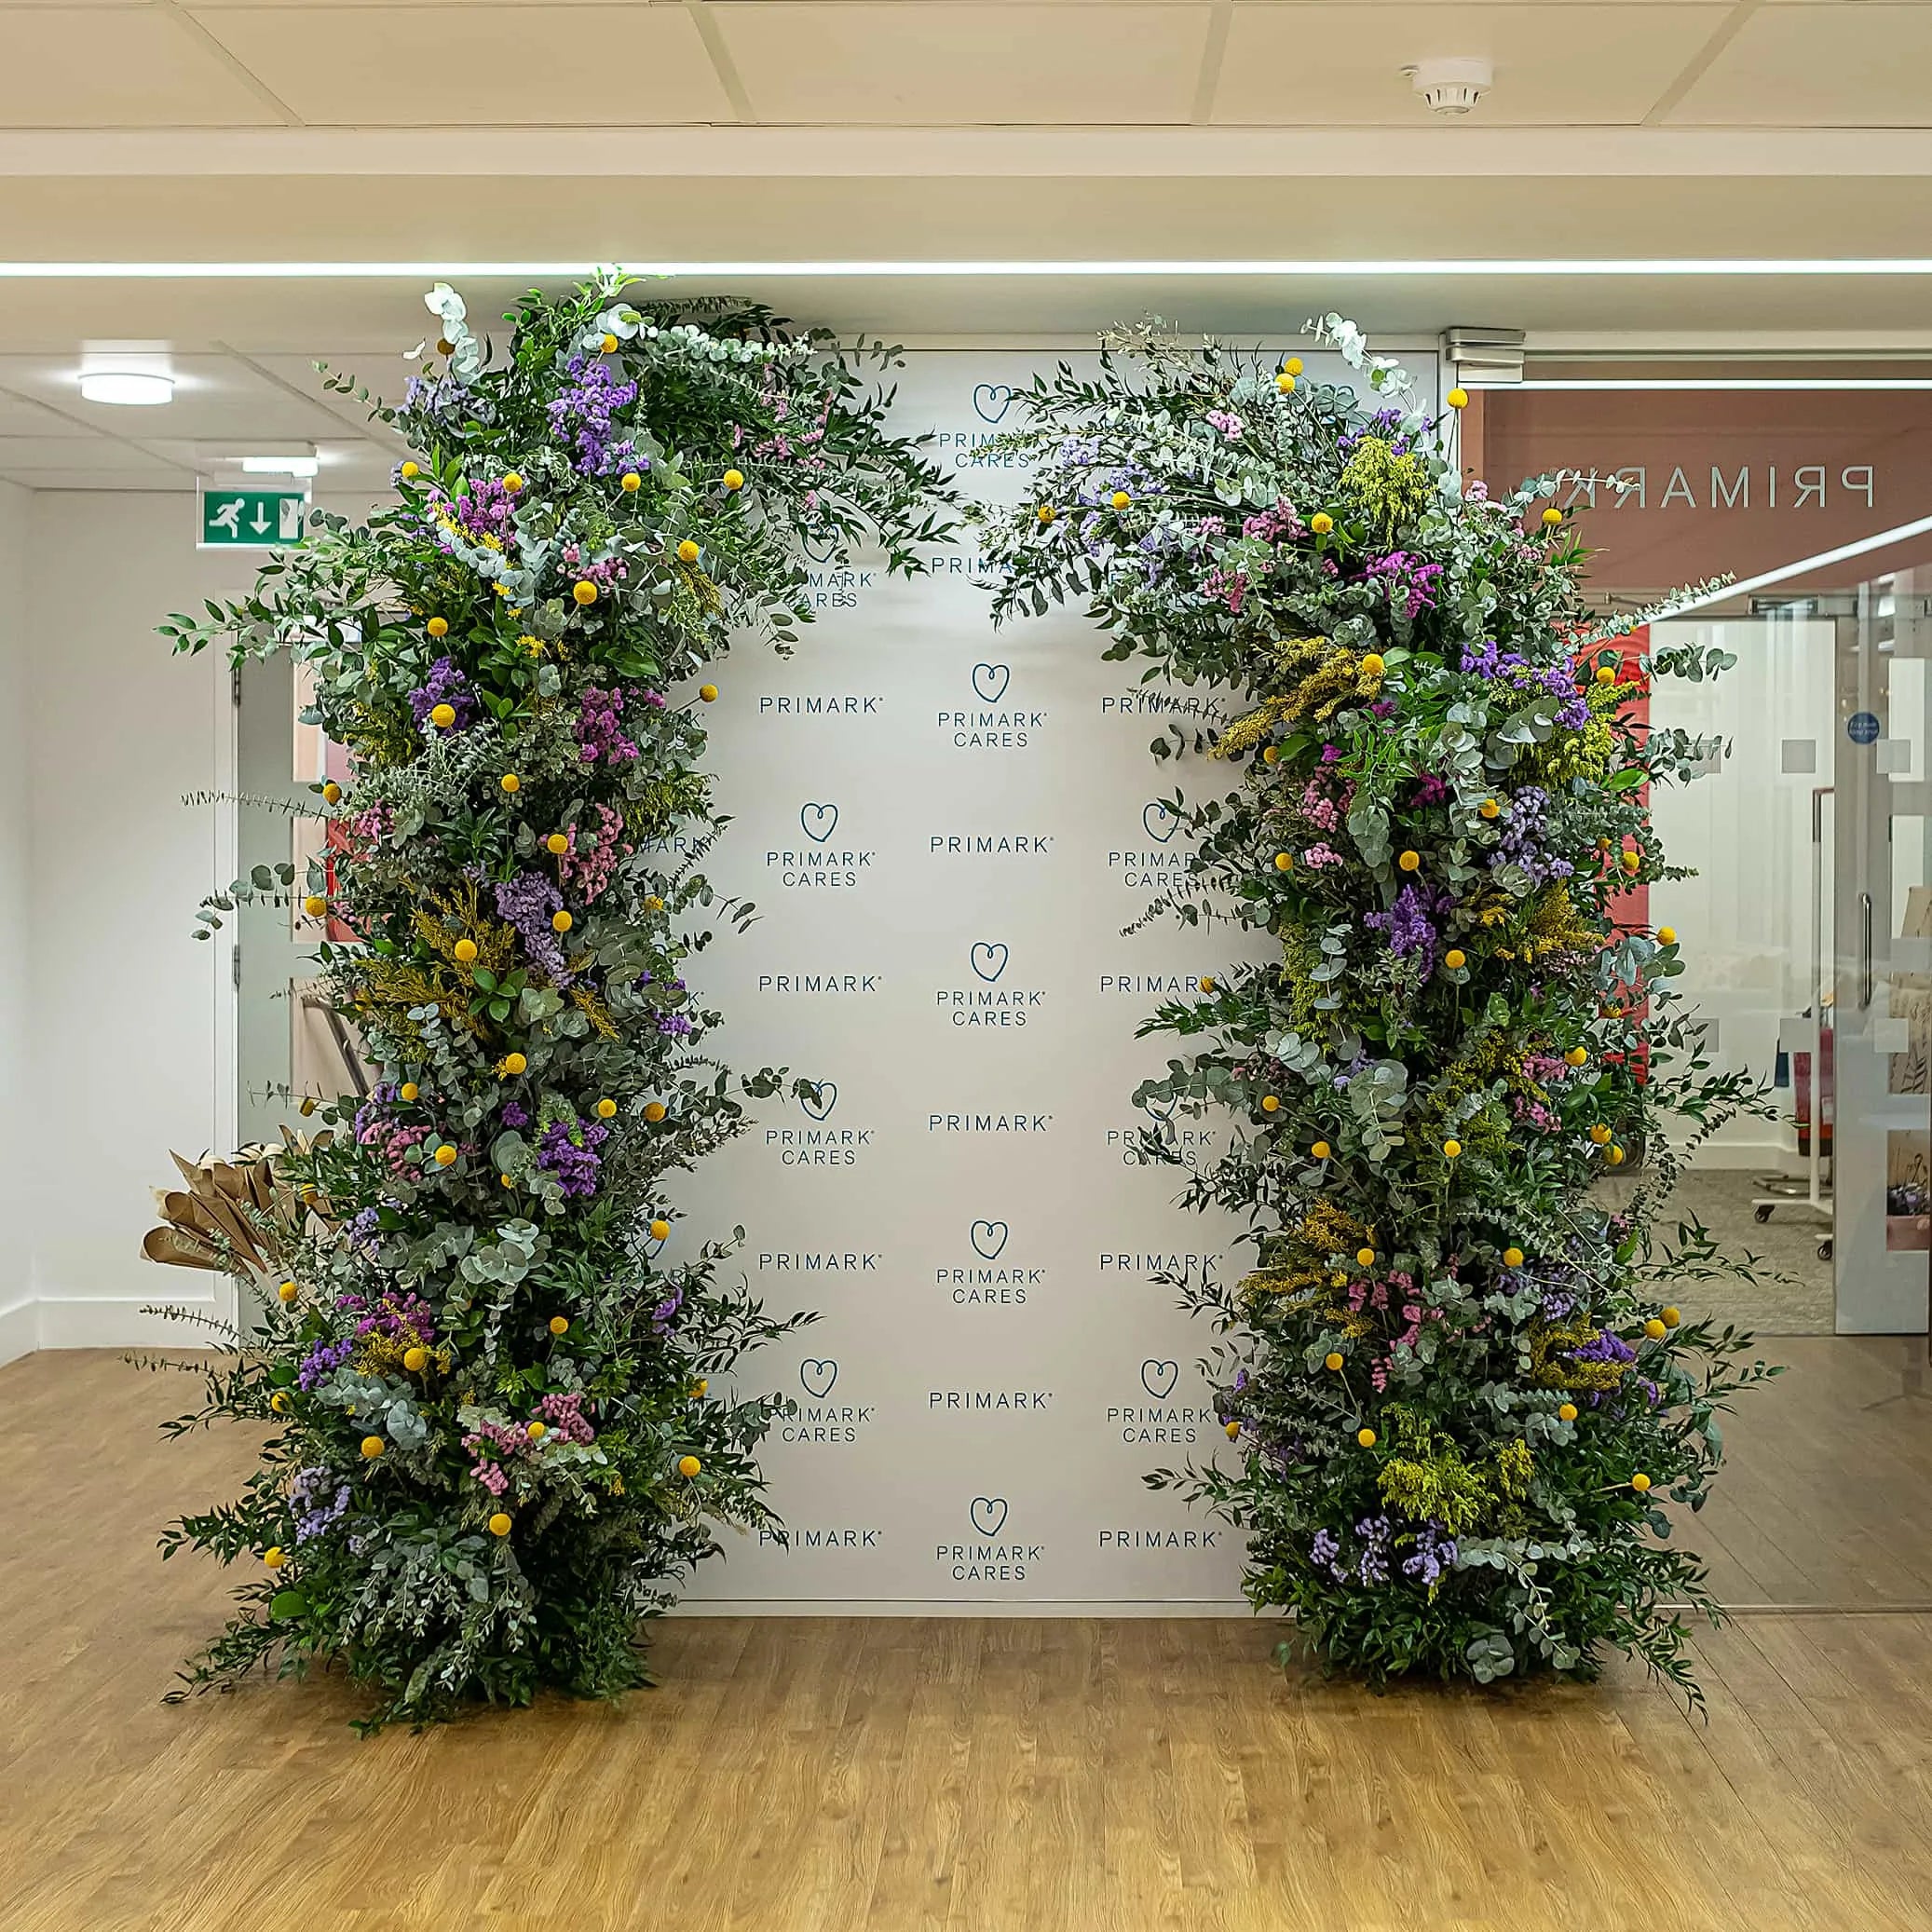 A bespoke floral arch created for Primark’s latest collection launch event, perfect for a wonderful picture moment